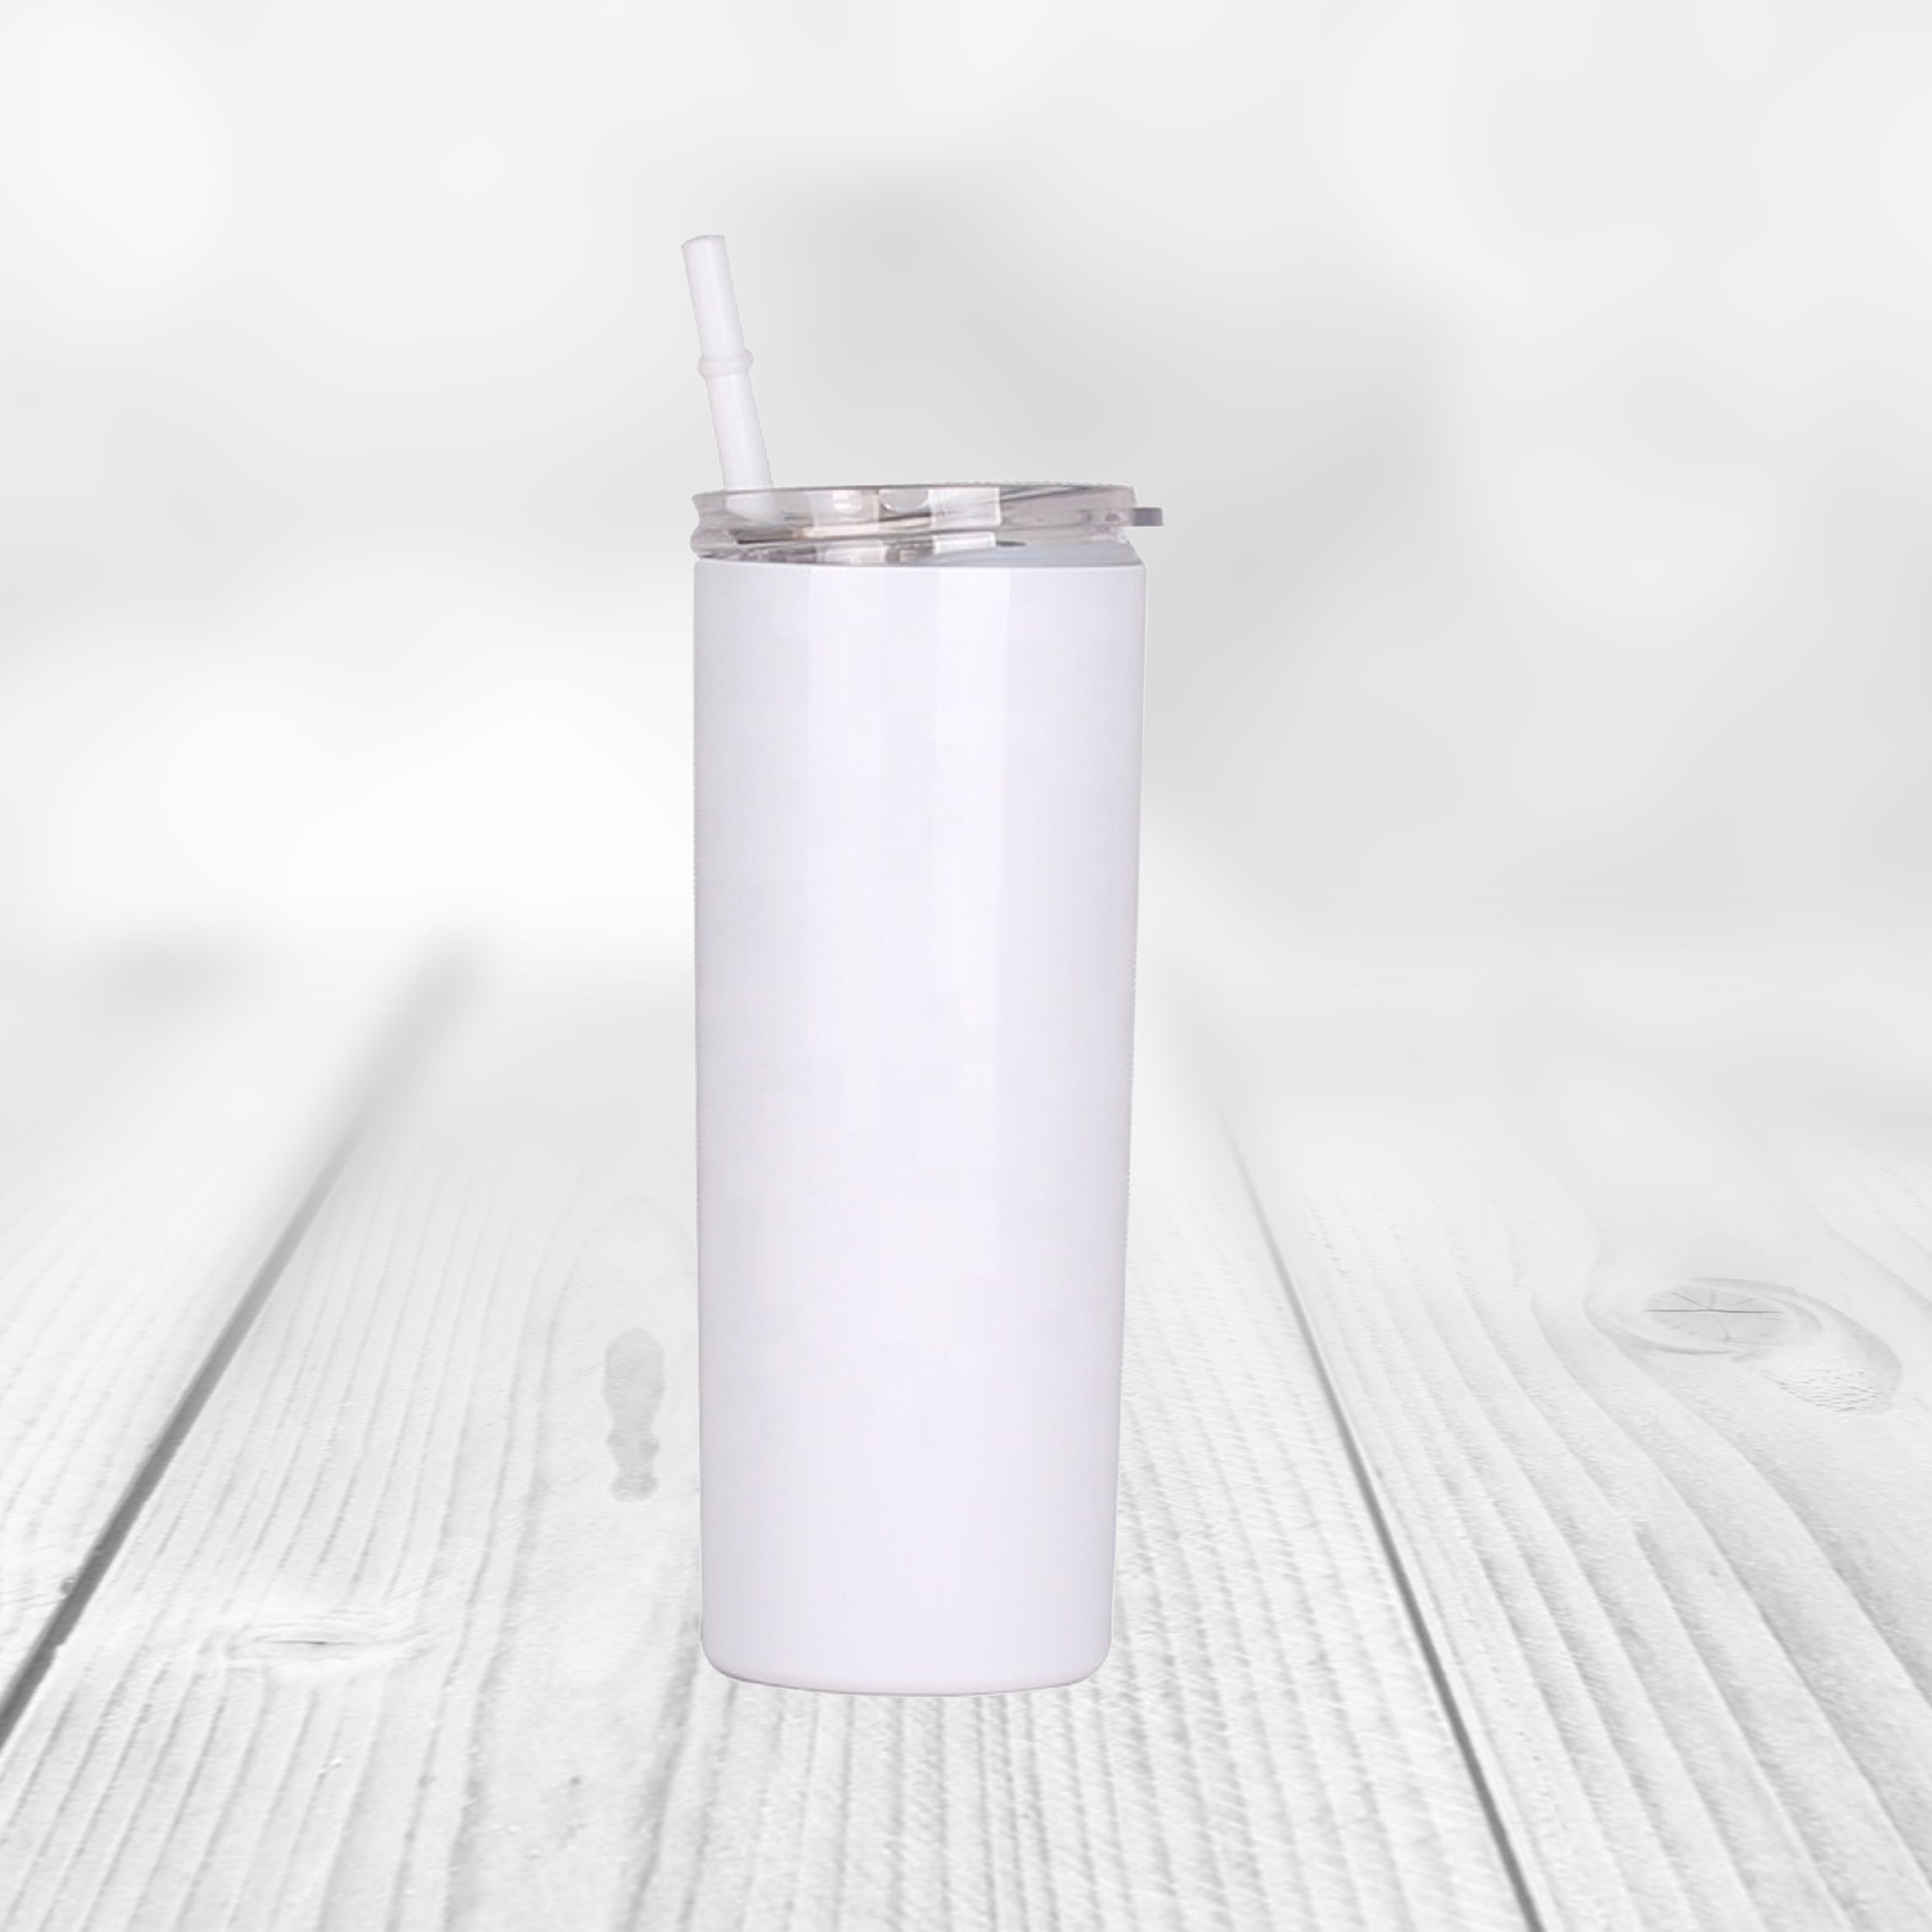 24 Pack: 12oz. Stainless Steel Sublimation Tumbler by Make Market, Size: One size, White